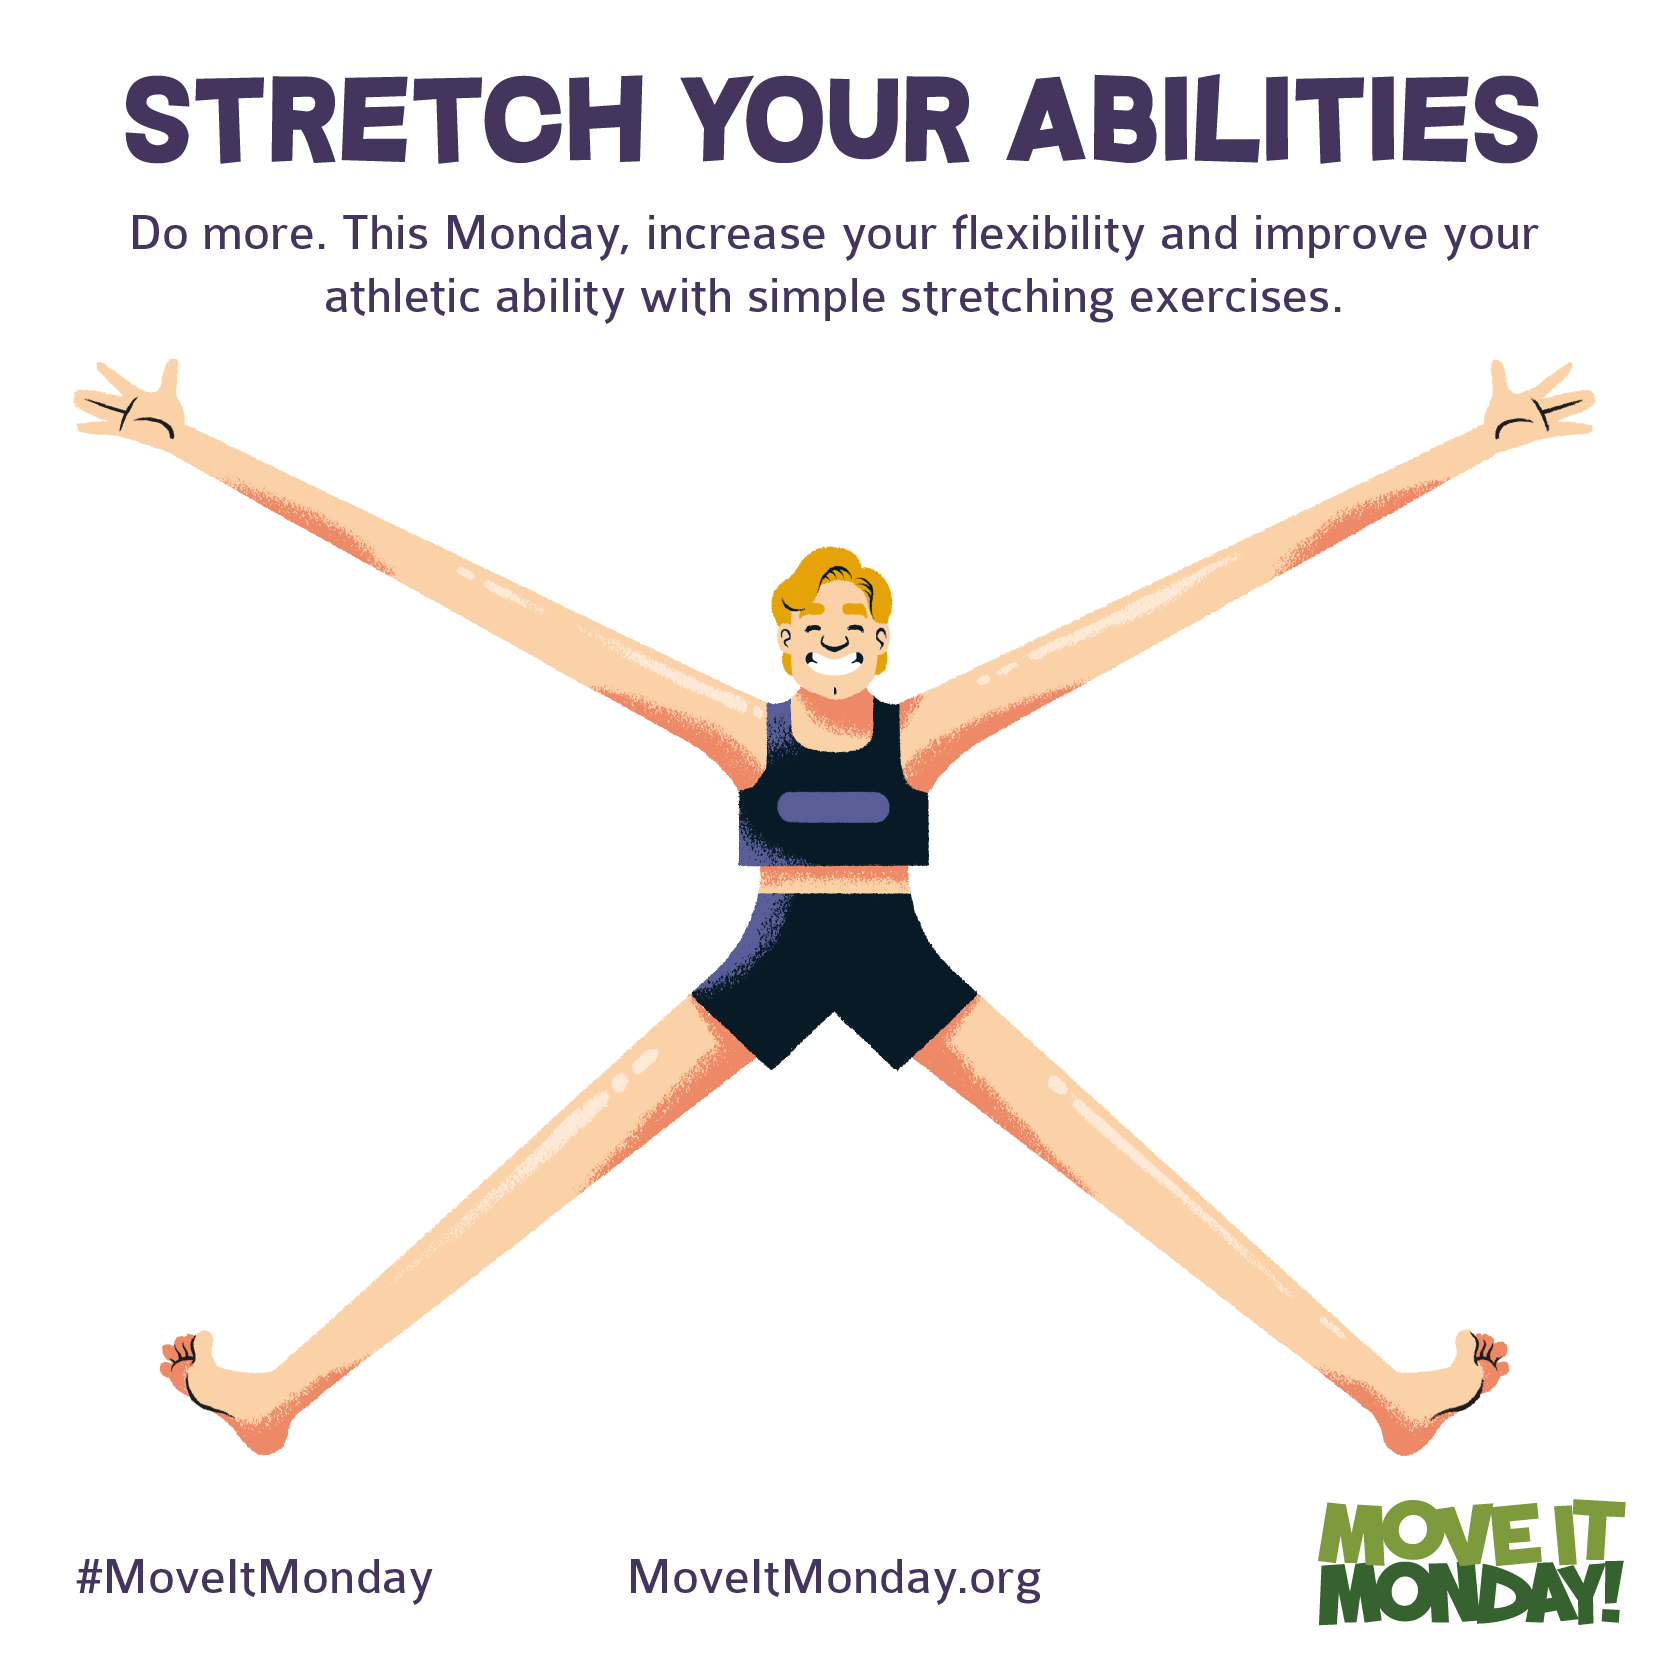 This Monday, Stretch Out to Increase Flexibility - The Monday Campaigns